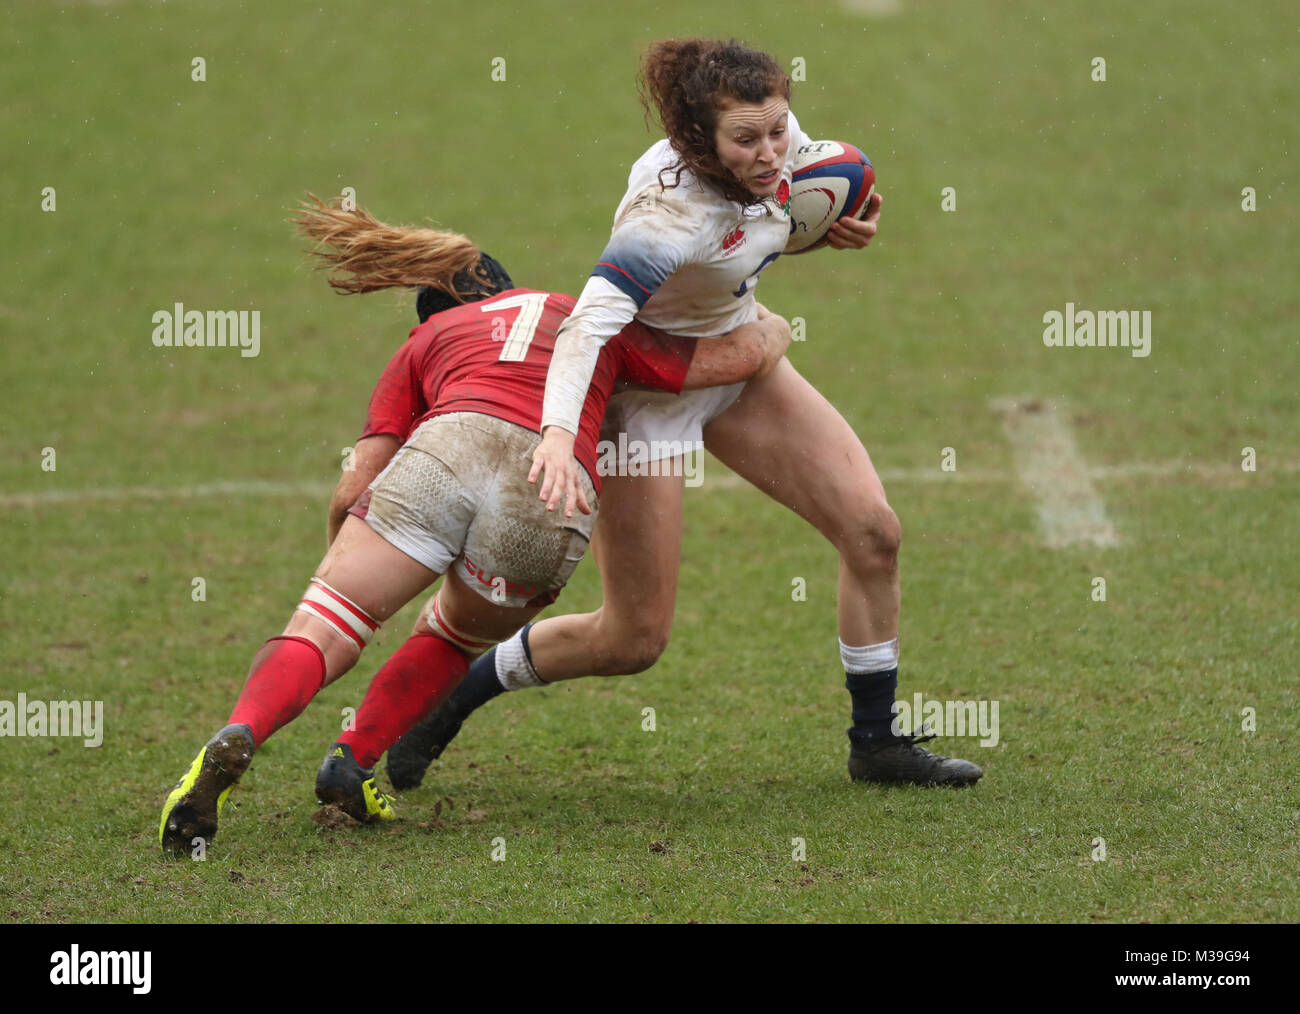 England's Charlotte Pearce (right) is tackled by Wales' Beth Lewis during the NatWest Women's 6 Nations match at Twickenham Stoop, London. Stock Photo